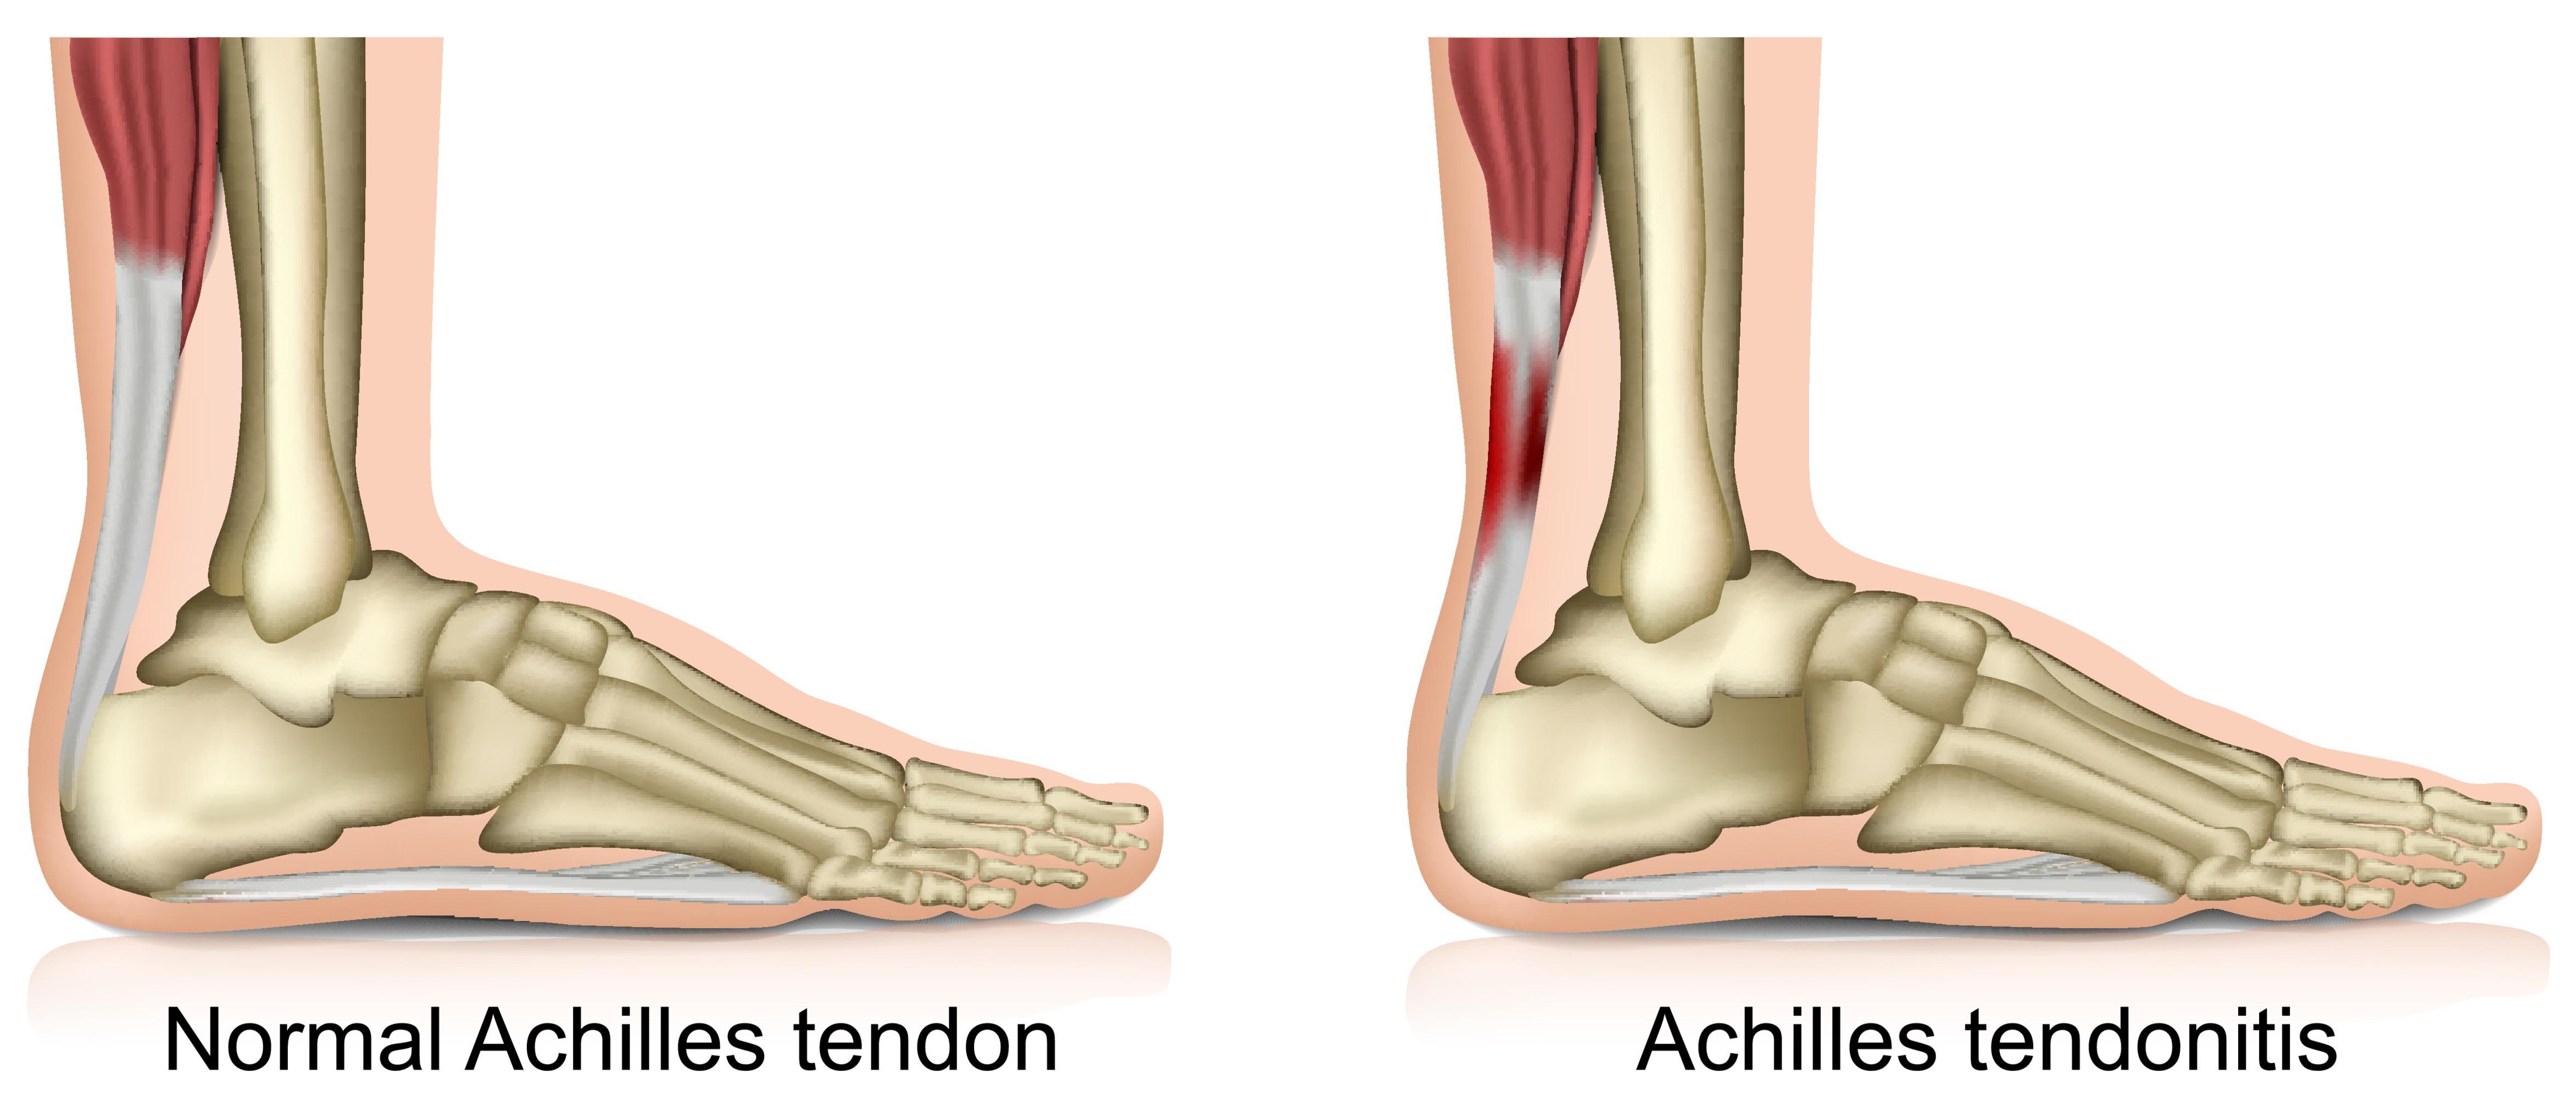 pain in my achilles tendon in the morning